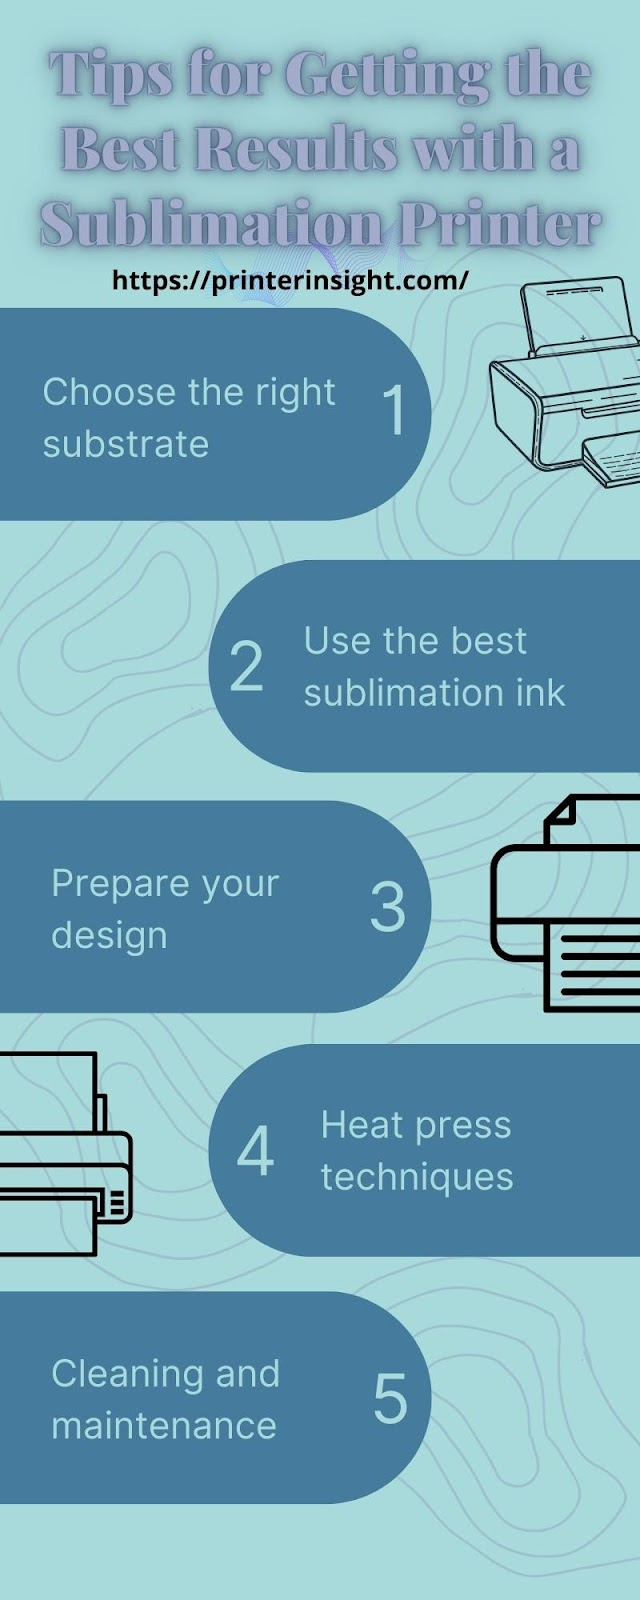 Tips for Getting the Best Results with a Sublimation Printer